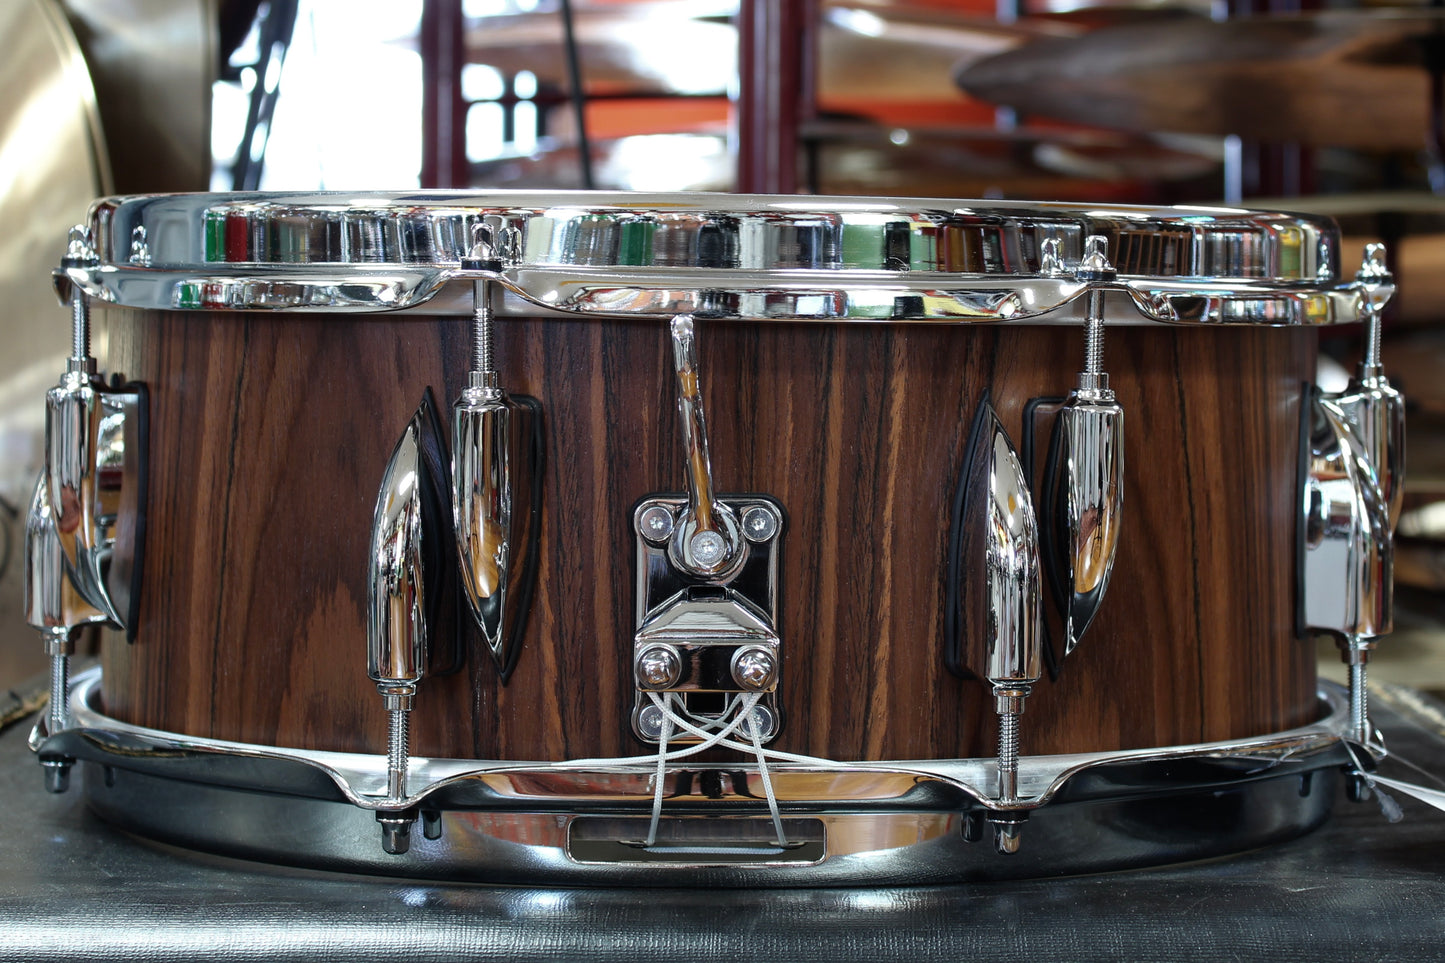 Sonor Vintage Series 5"x14" Beech Snare Drum in Rosewood Semi-Gloss